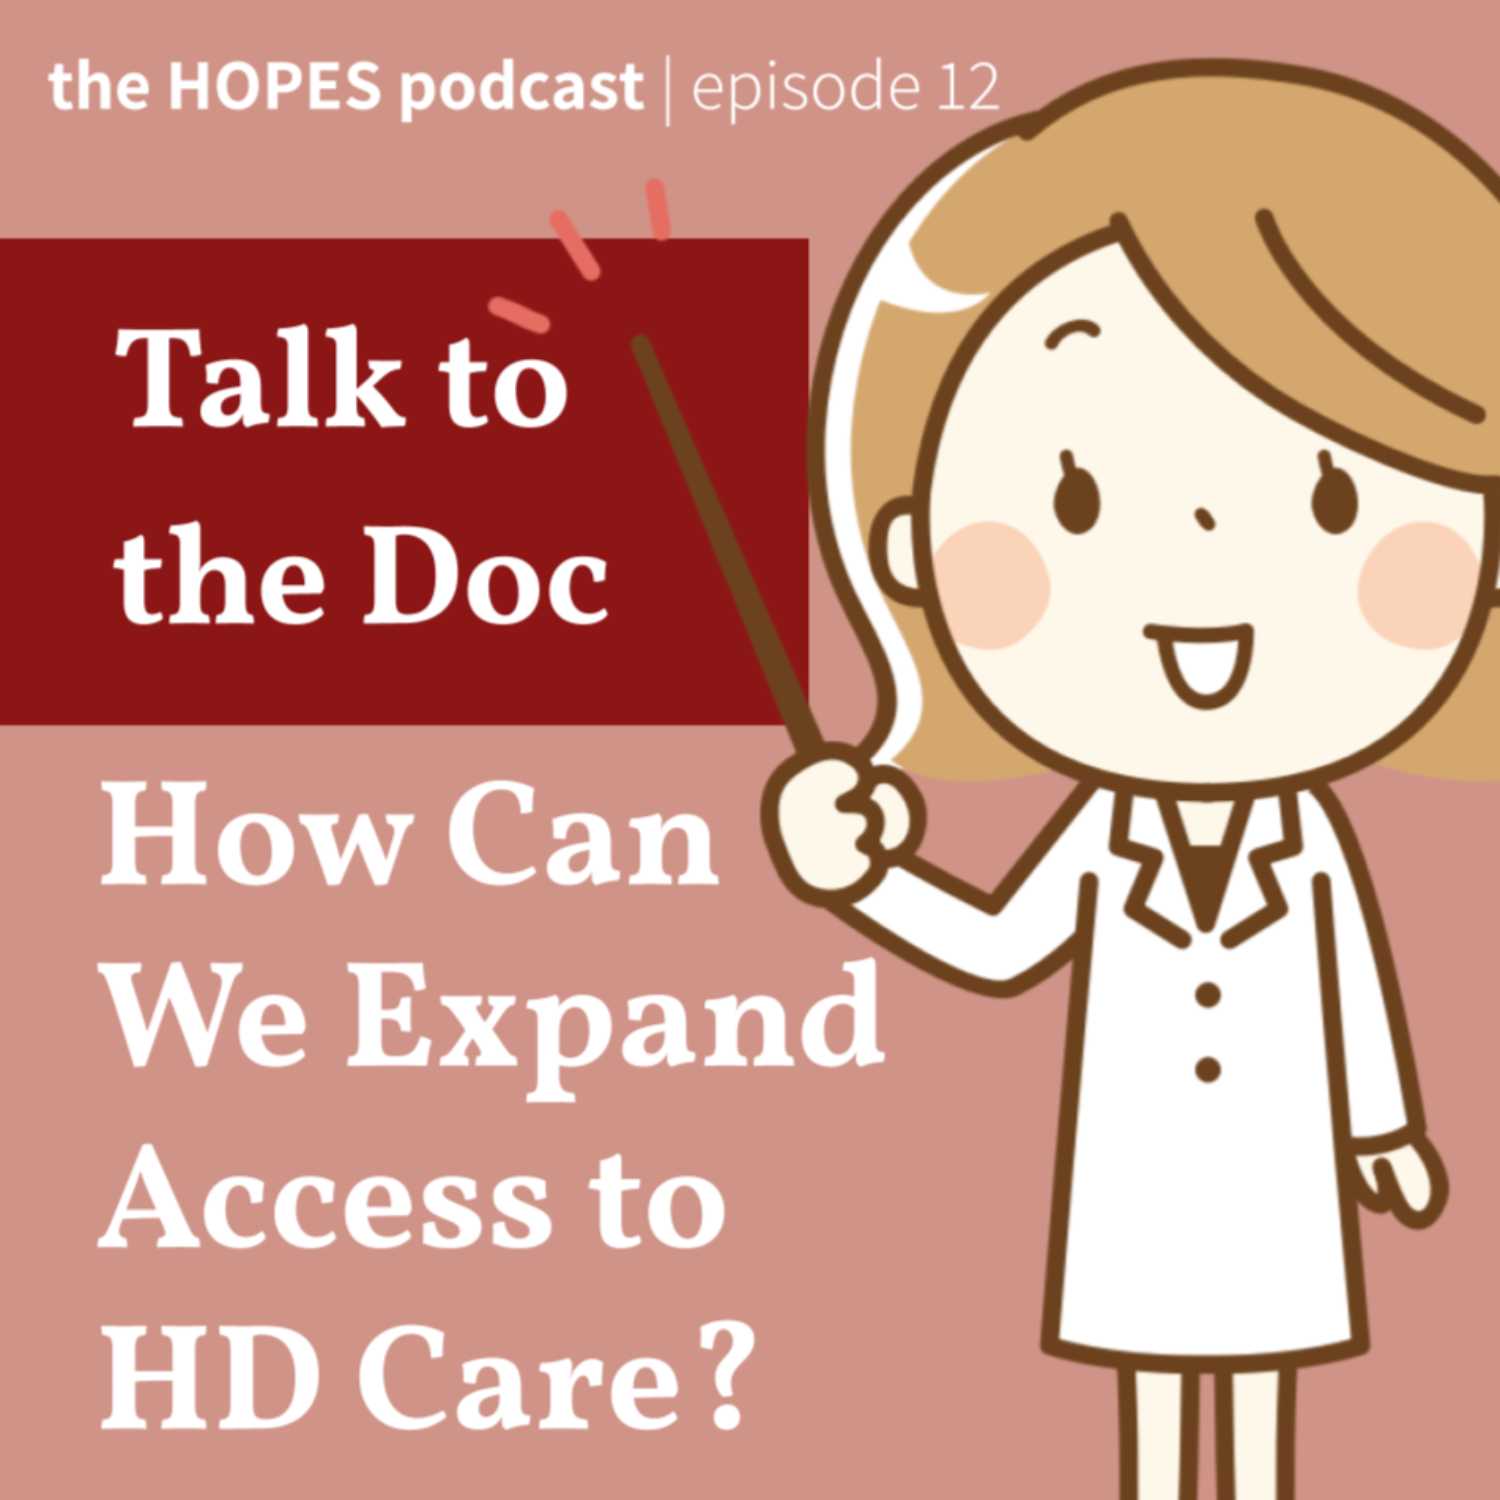 Episode 12: Talk to the Doc: How Can We Expand Access to HD Care? ft. Dr. Alexandra Duffy